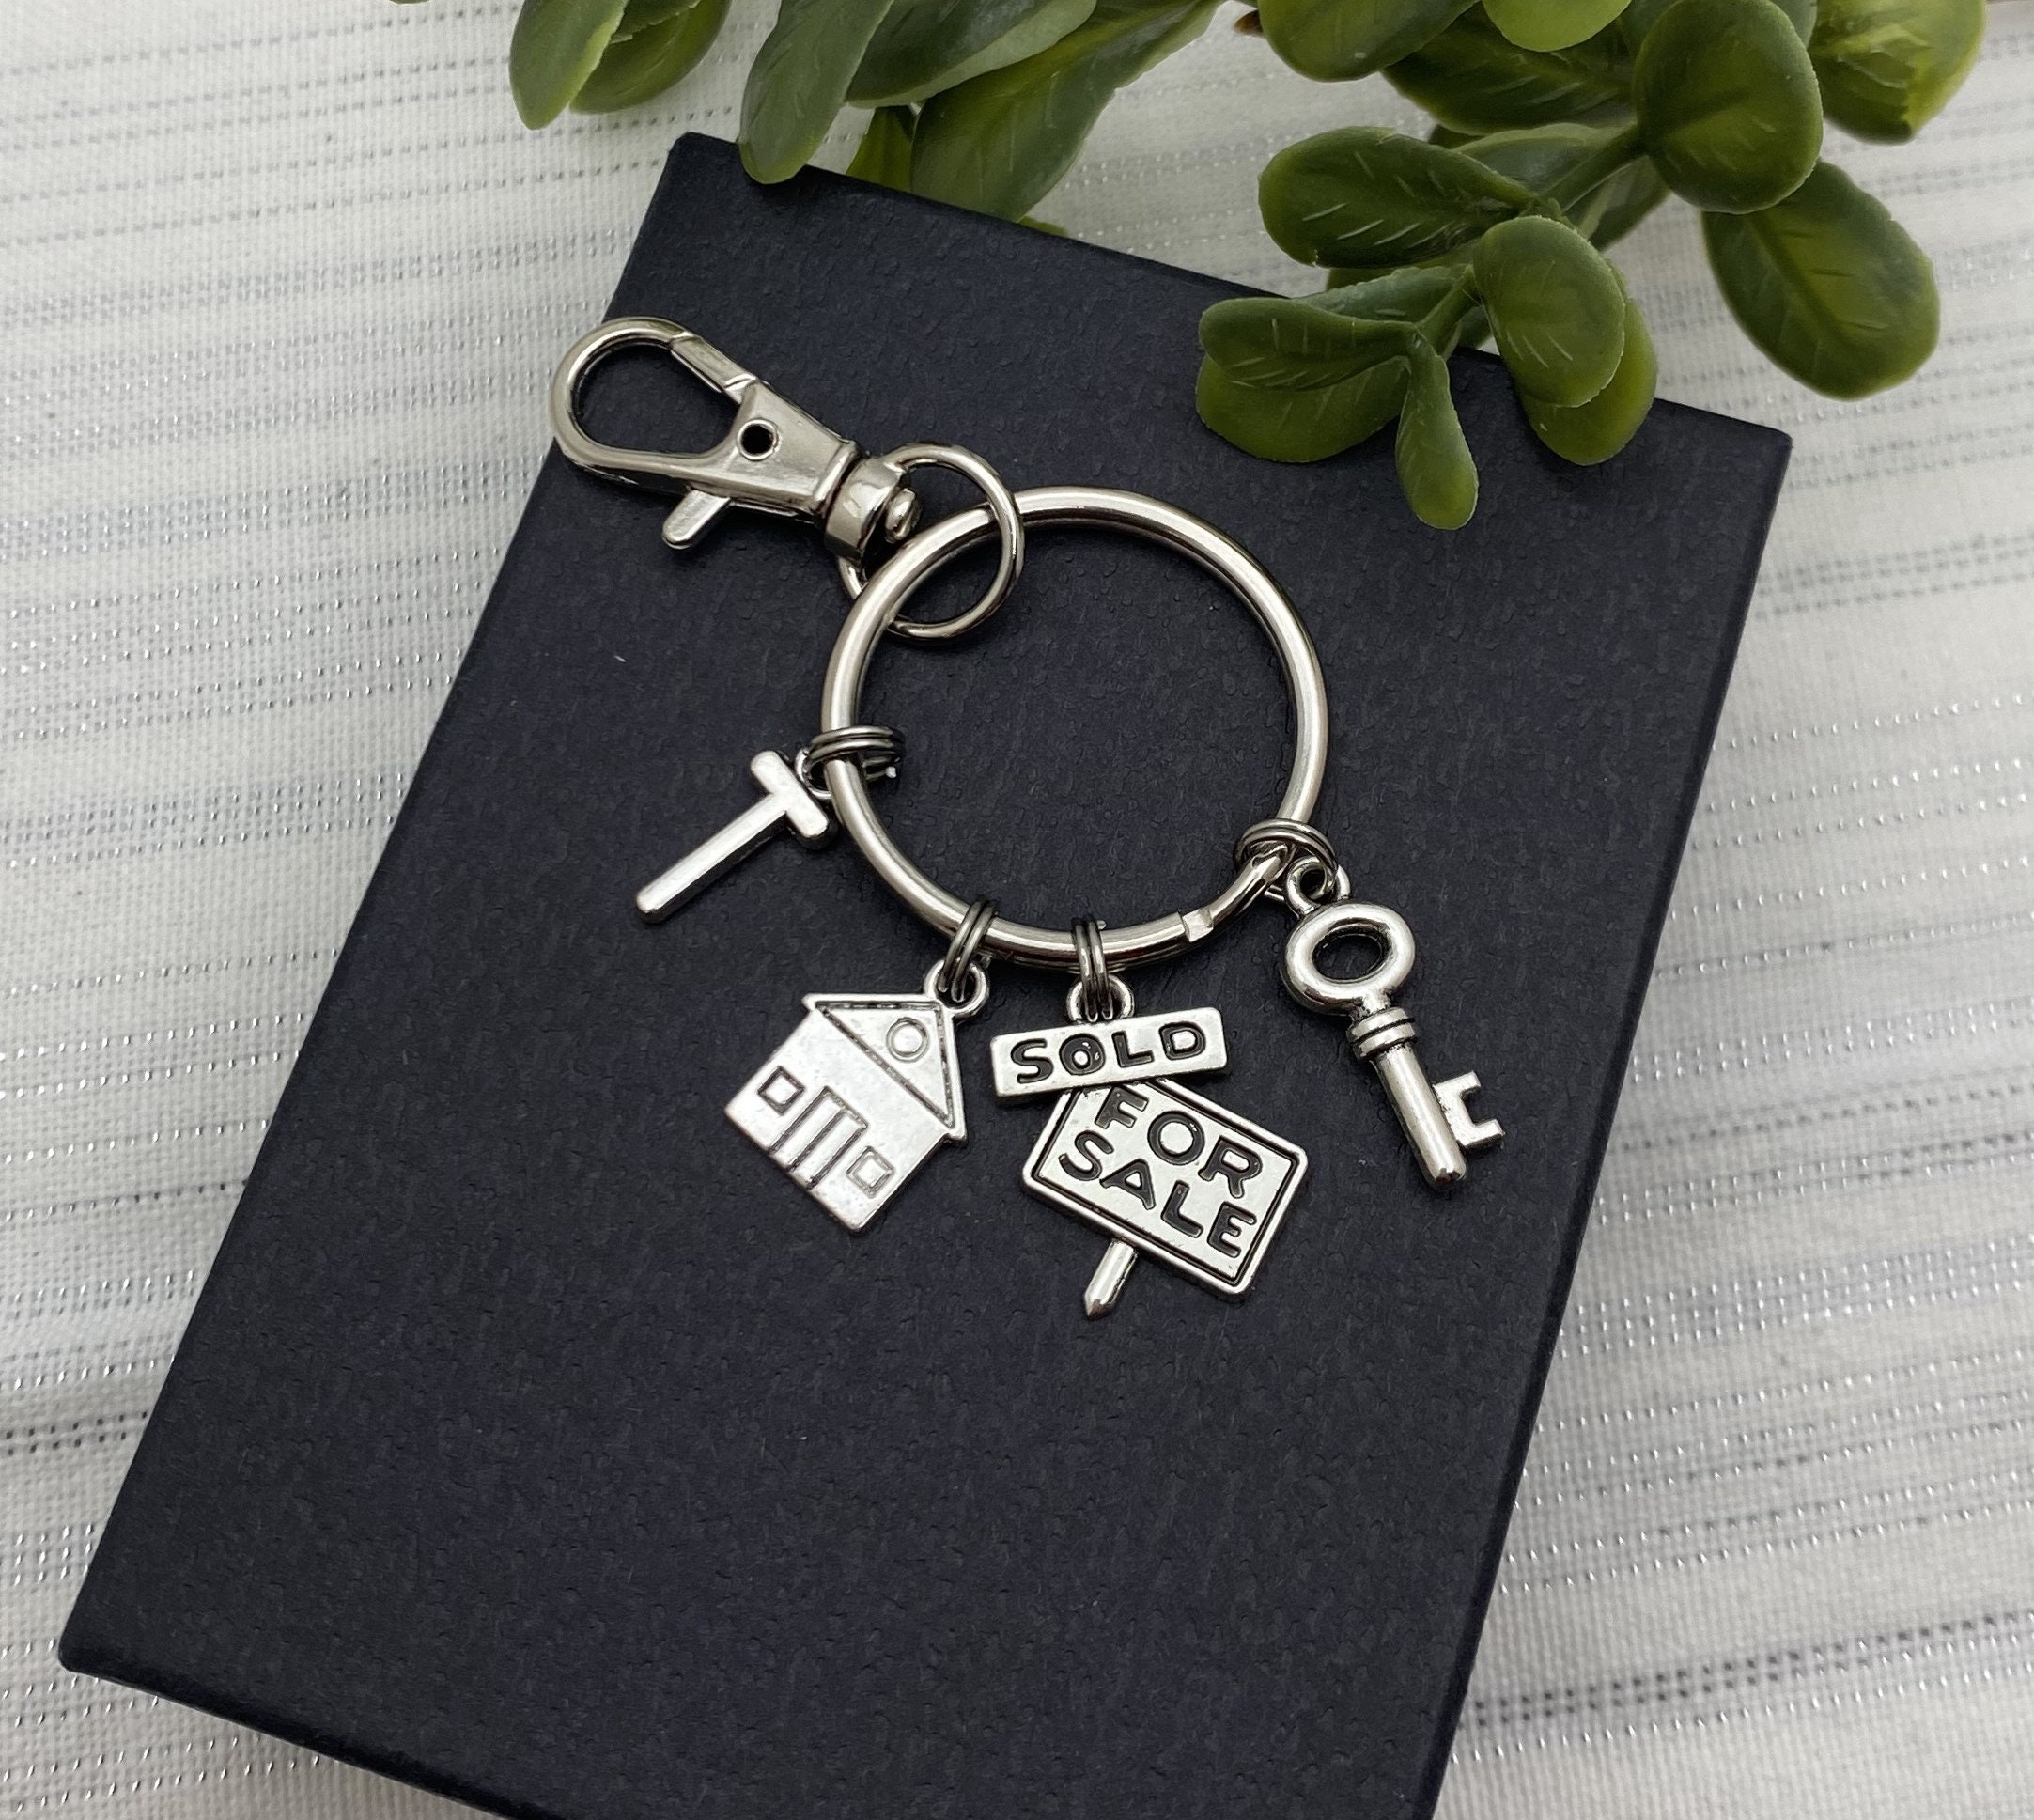 10-Pack Personalized House Design Key Chains 360 Degree Rotational Keychains by OnePlace Gifts